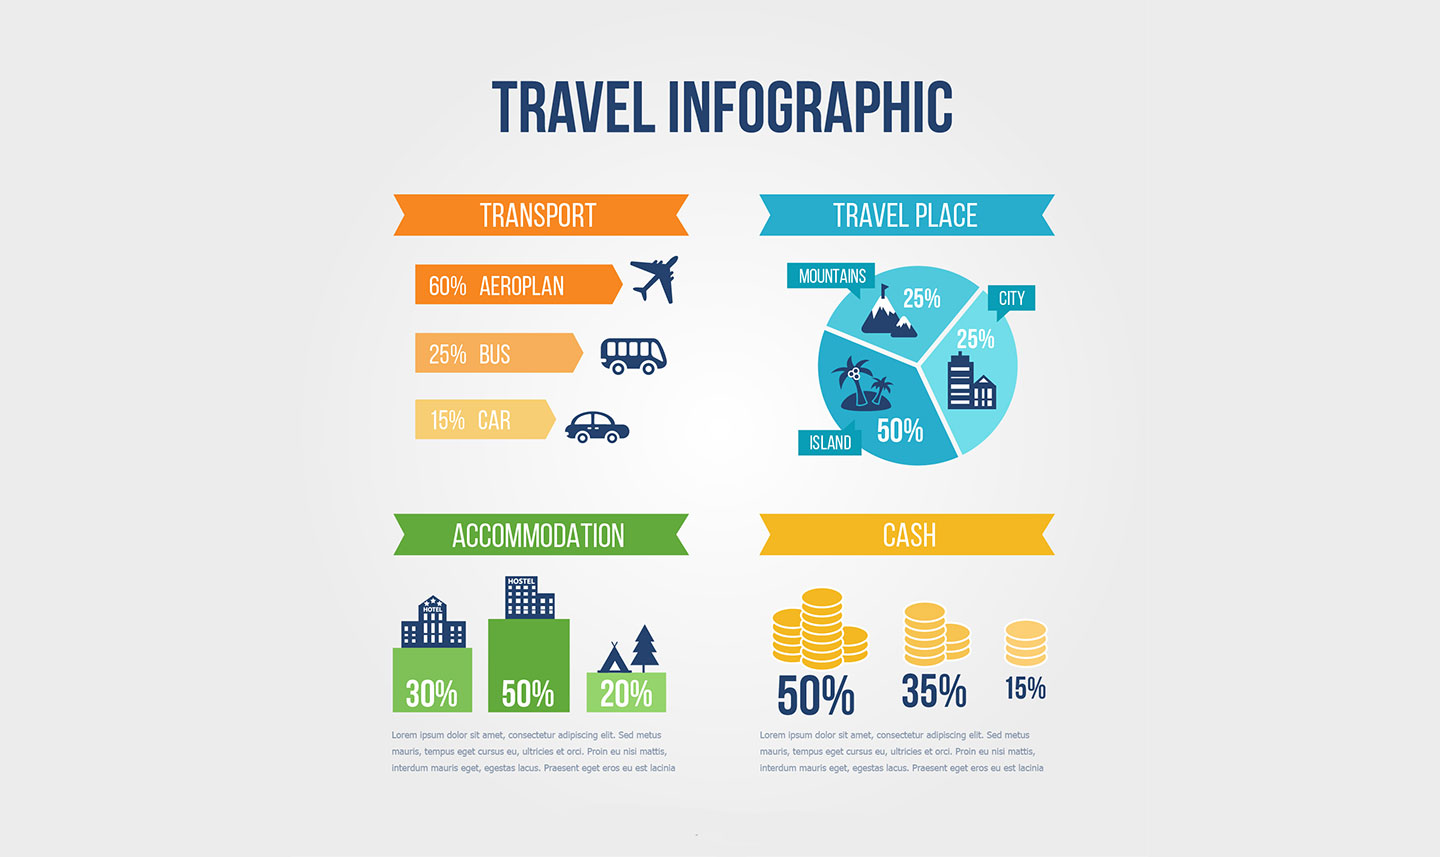 Travel Infographic Templates. on Behance